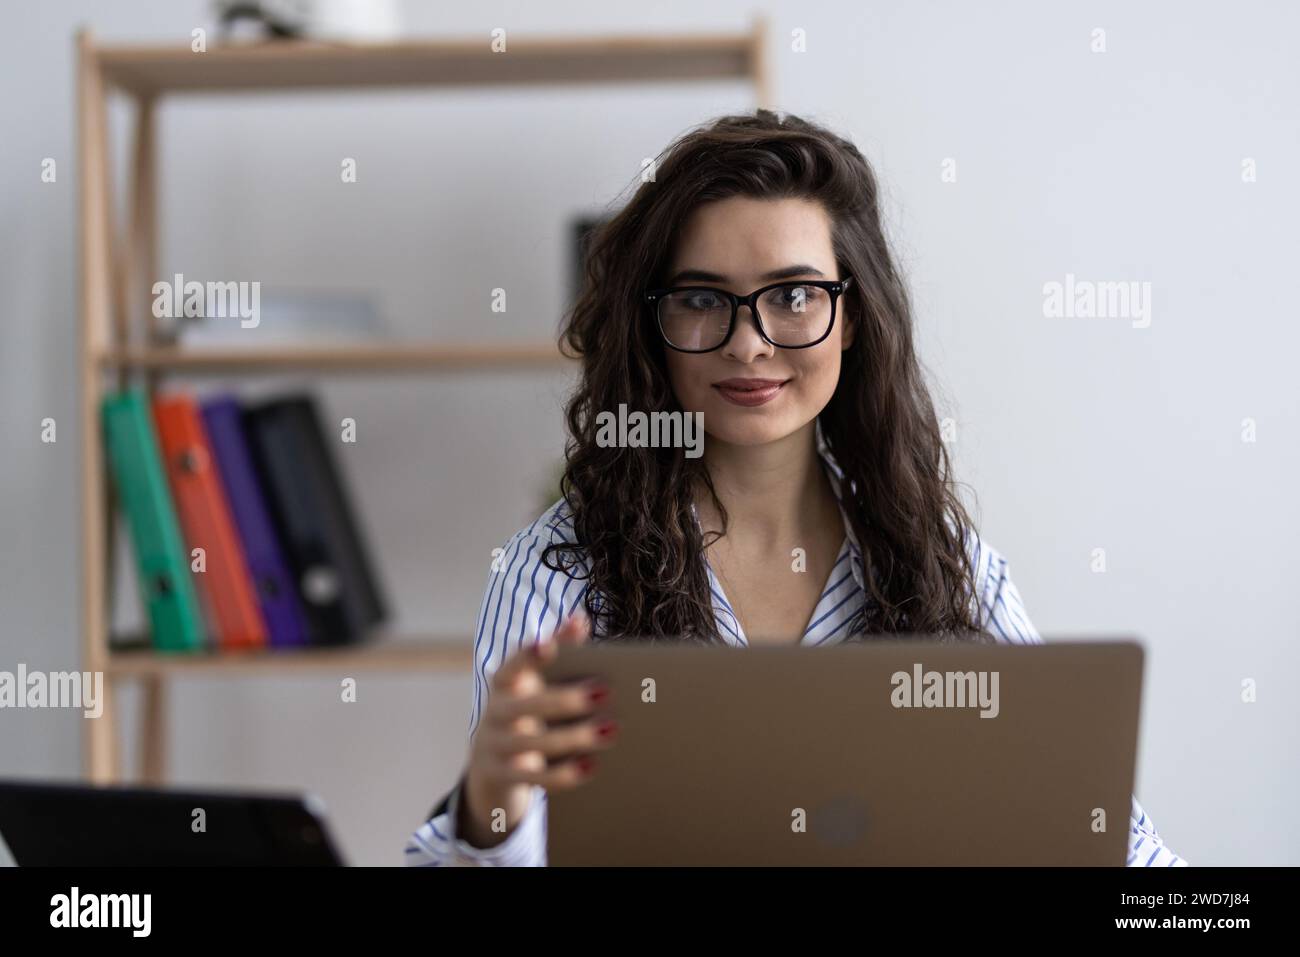 Shot of an attractive businesswoman working on laptop in her workstation. Stock Photo